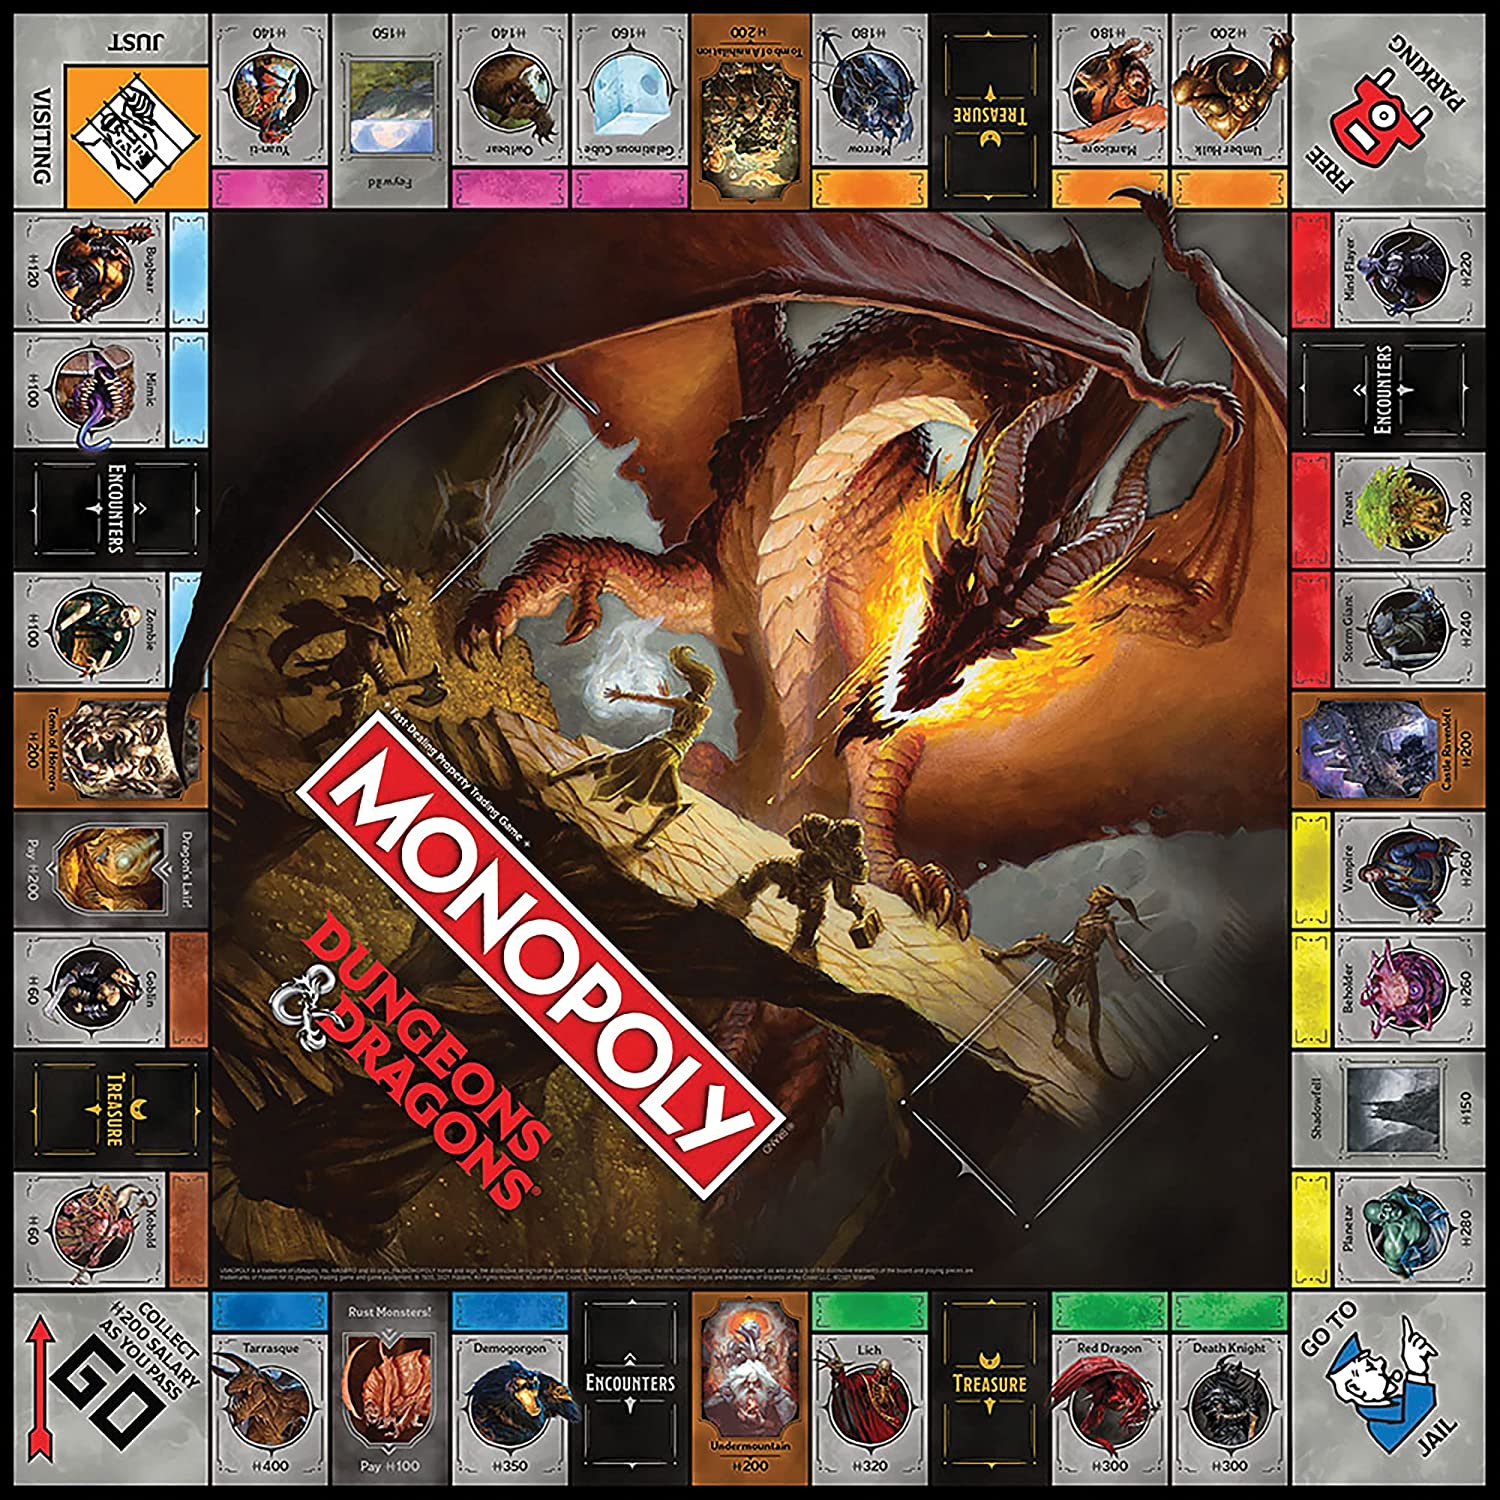 The Lair Dungeons & Dragons Monopoly Board Game